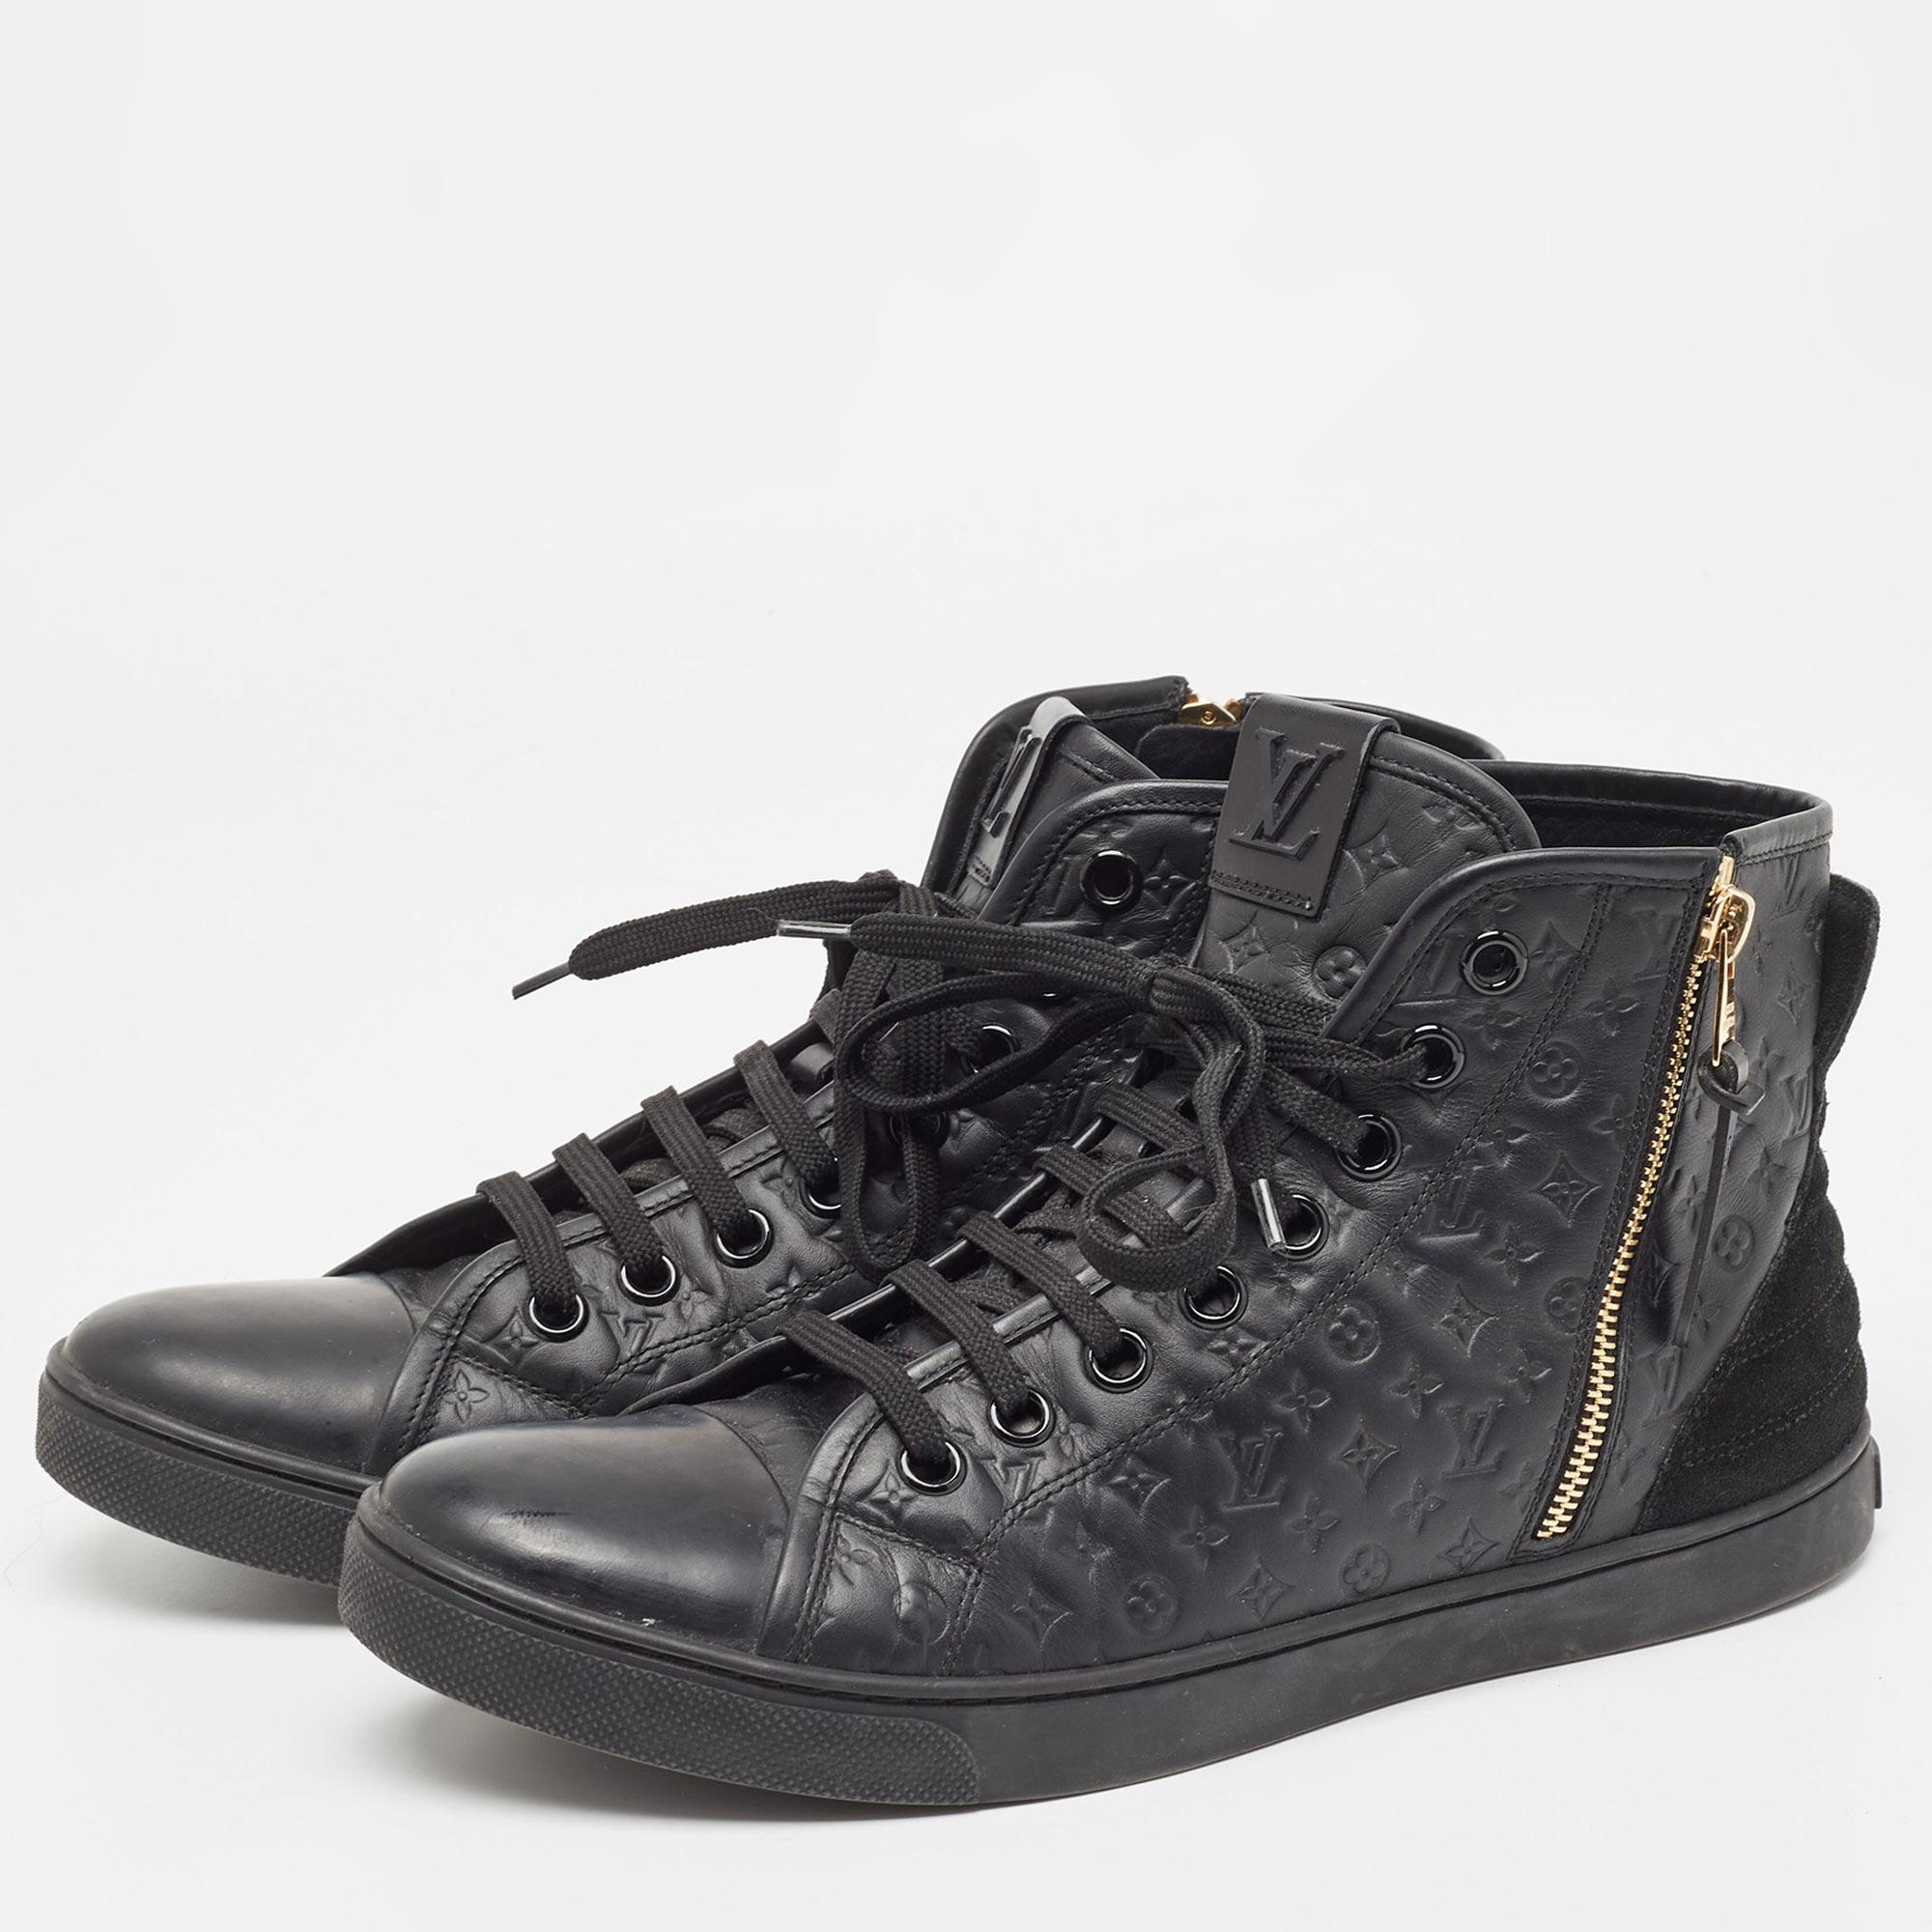 Upgrade your style with these LV black sneakers. Meticulously designed for fashion and comfort, they're the ideal choice for a trendy and comfortable stride.

